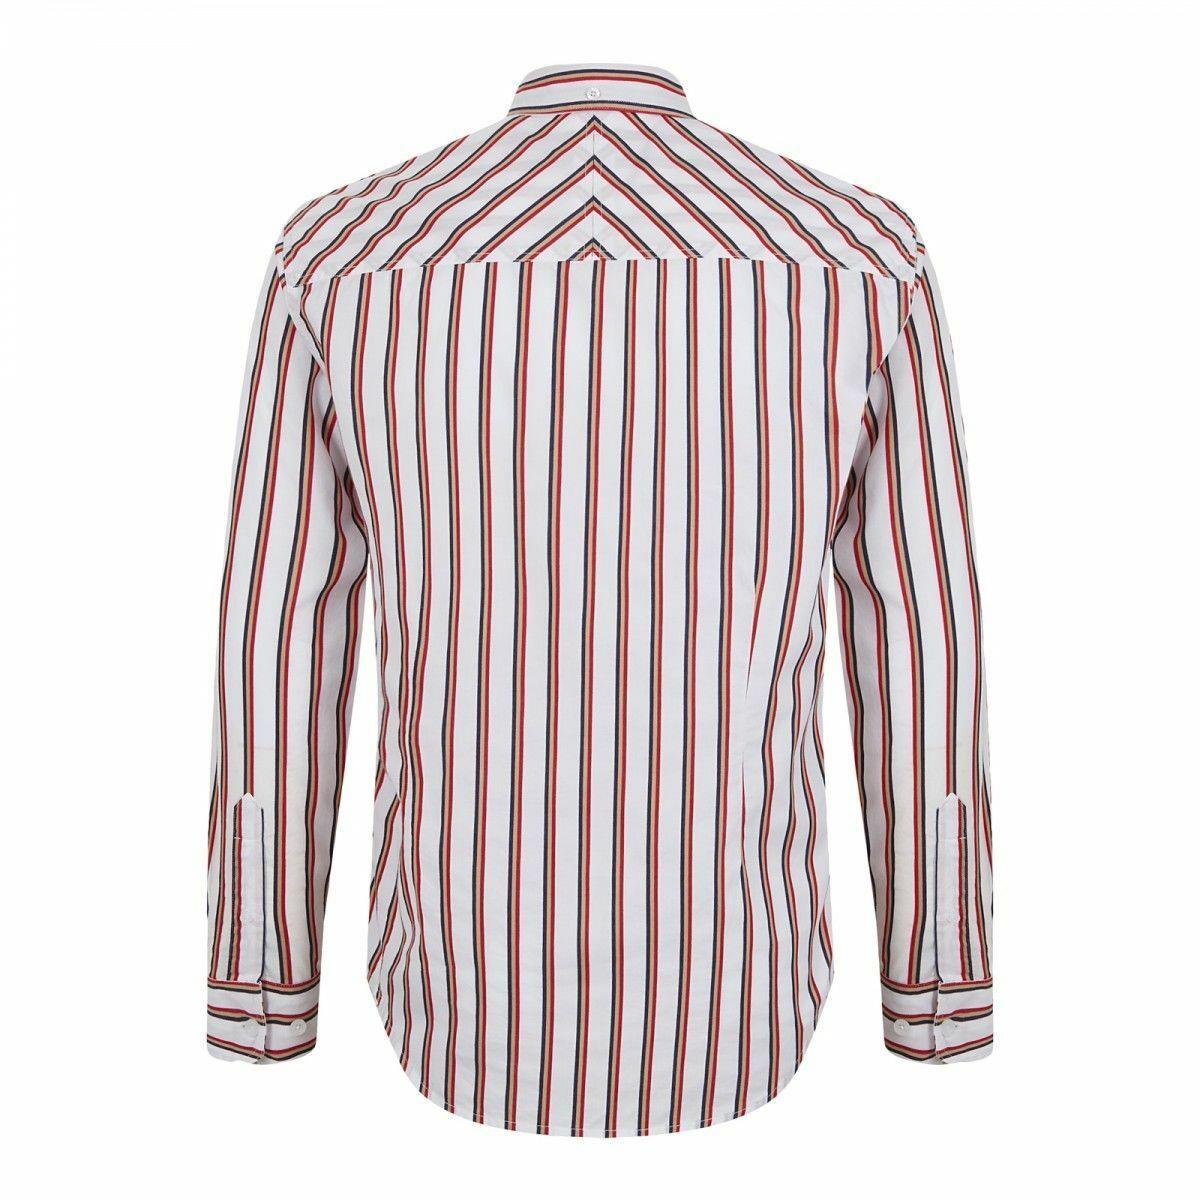 MERC Elsted white long-sleeve striped cotton shirt